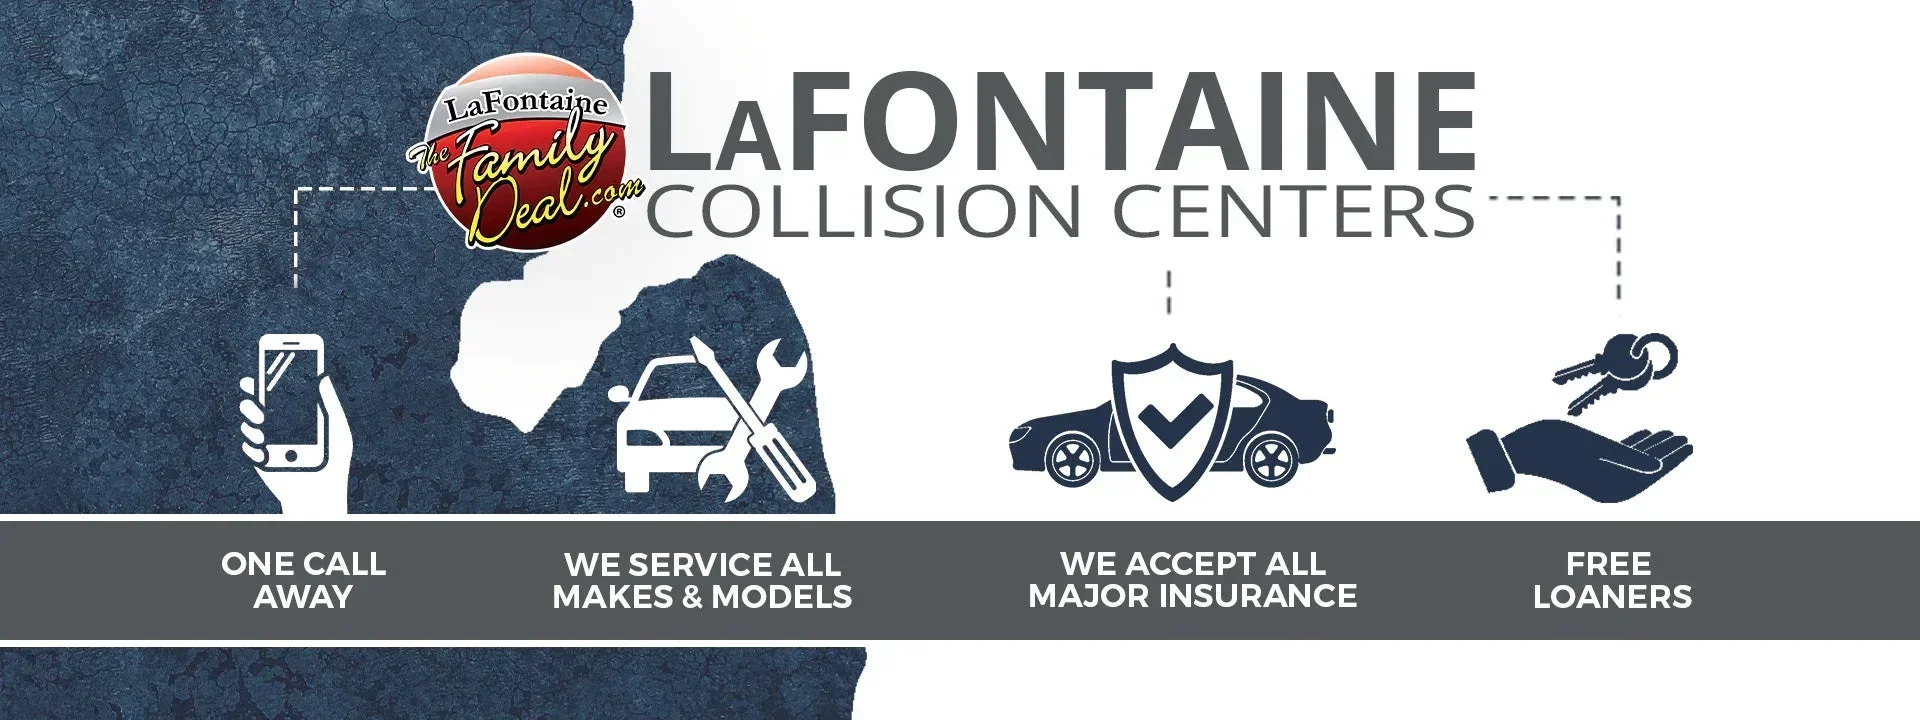 LaFontaine Collision Centers Infographic